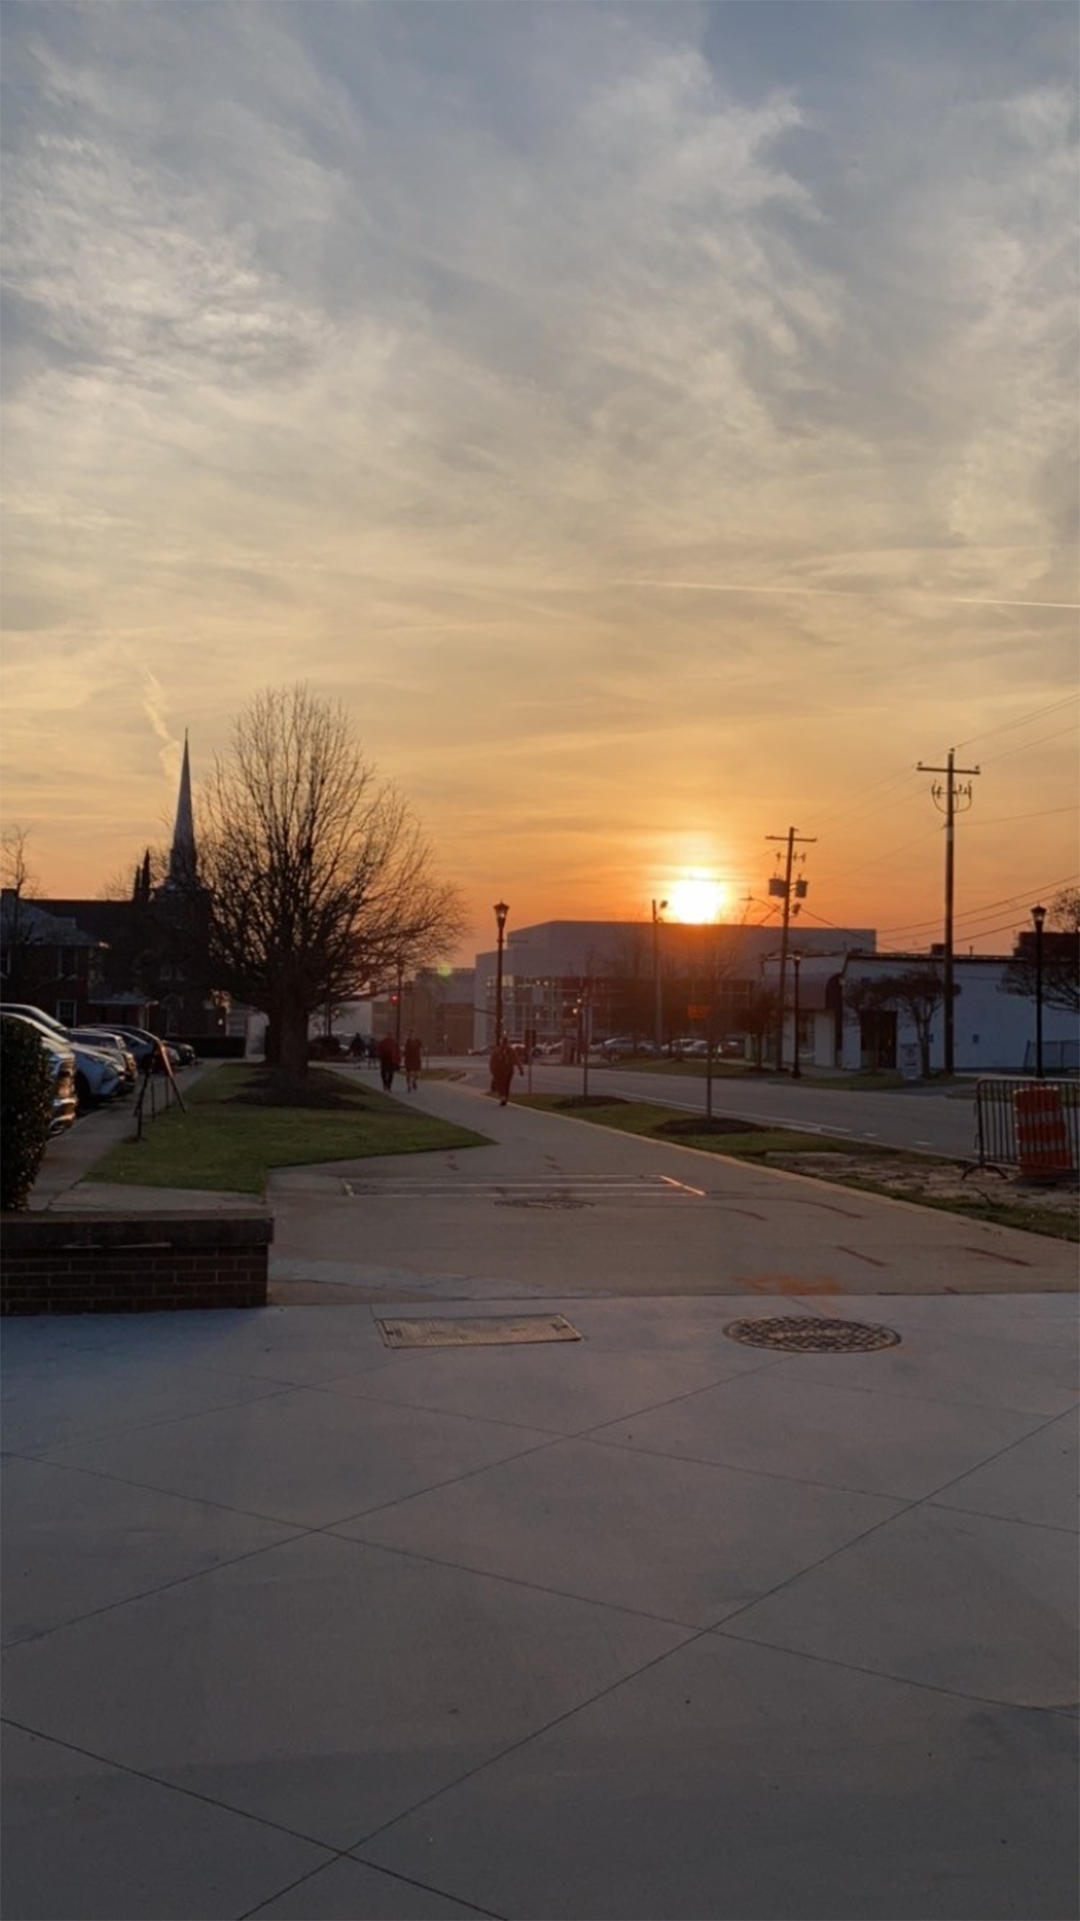 The image captures a serene sunset with orange hues behind a distant steeple, overlooking a quiet urban streetscape with people walking and cars parked.